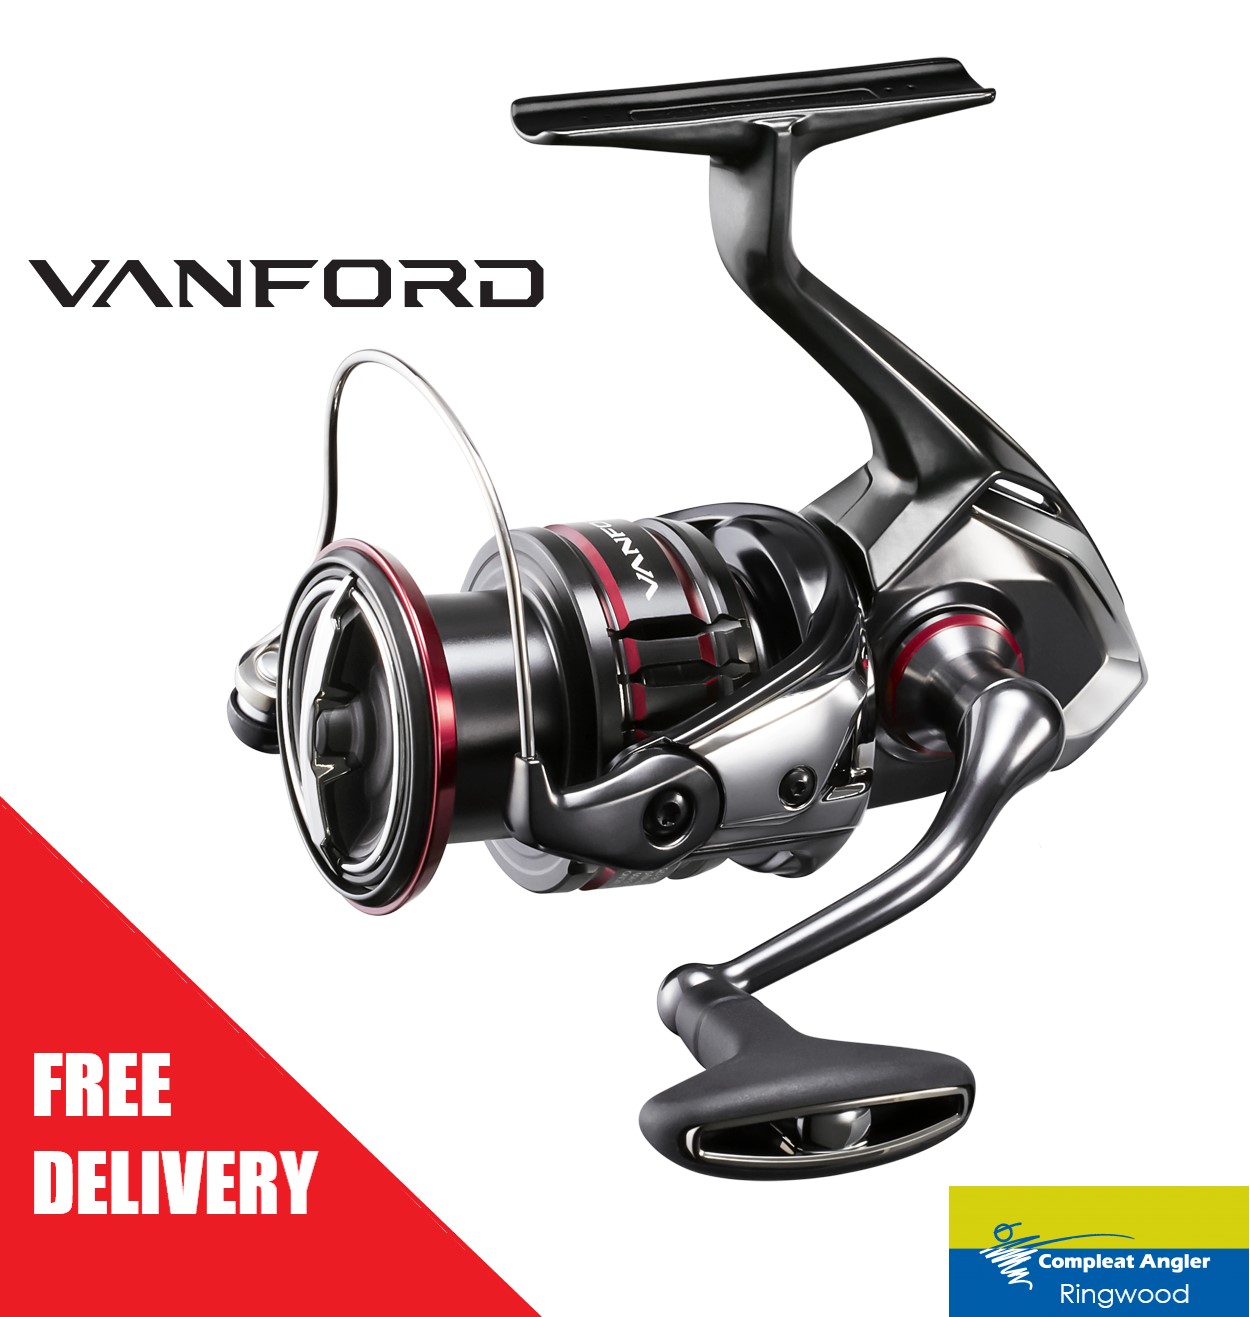 20 BRAND NEW SHIMANO VANFORD Spinning Reel With FREE GIFT & 1 YEAR